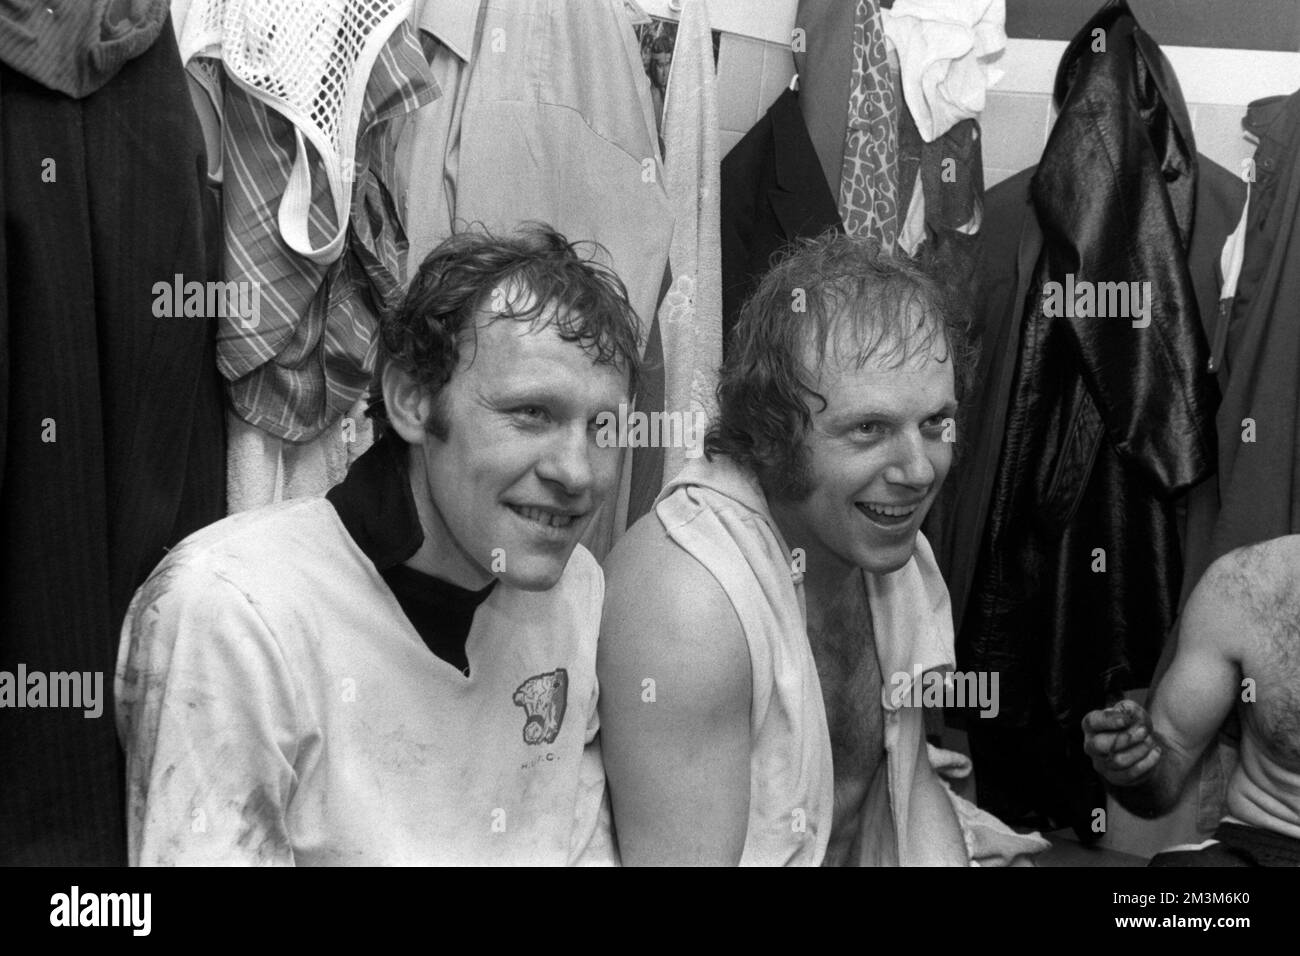 File photo dated 05-02-1972 of Hereford United's Ronnie Radford (l) and Ricky George (r) in the dressing room. Scorer of one of the FA Cups best goals, Radford's long-range stunner on a quagmire of a pitch for Hereford against top flight side Newcastle helped the non-league club to a huge cup shock in 1972. It earned the Bulls and Radford instant fame with the goal shown regularly in the ensuring years and BBC commentator John Motson later admitting it helped launch his own successful career. Radford died at the age of 79 in November. Issue date: Friday December 16, 2022. Stock Photo